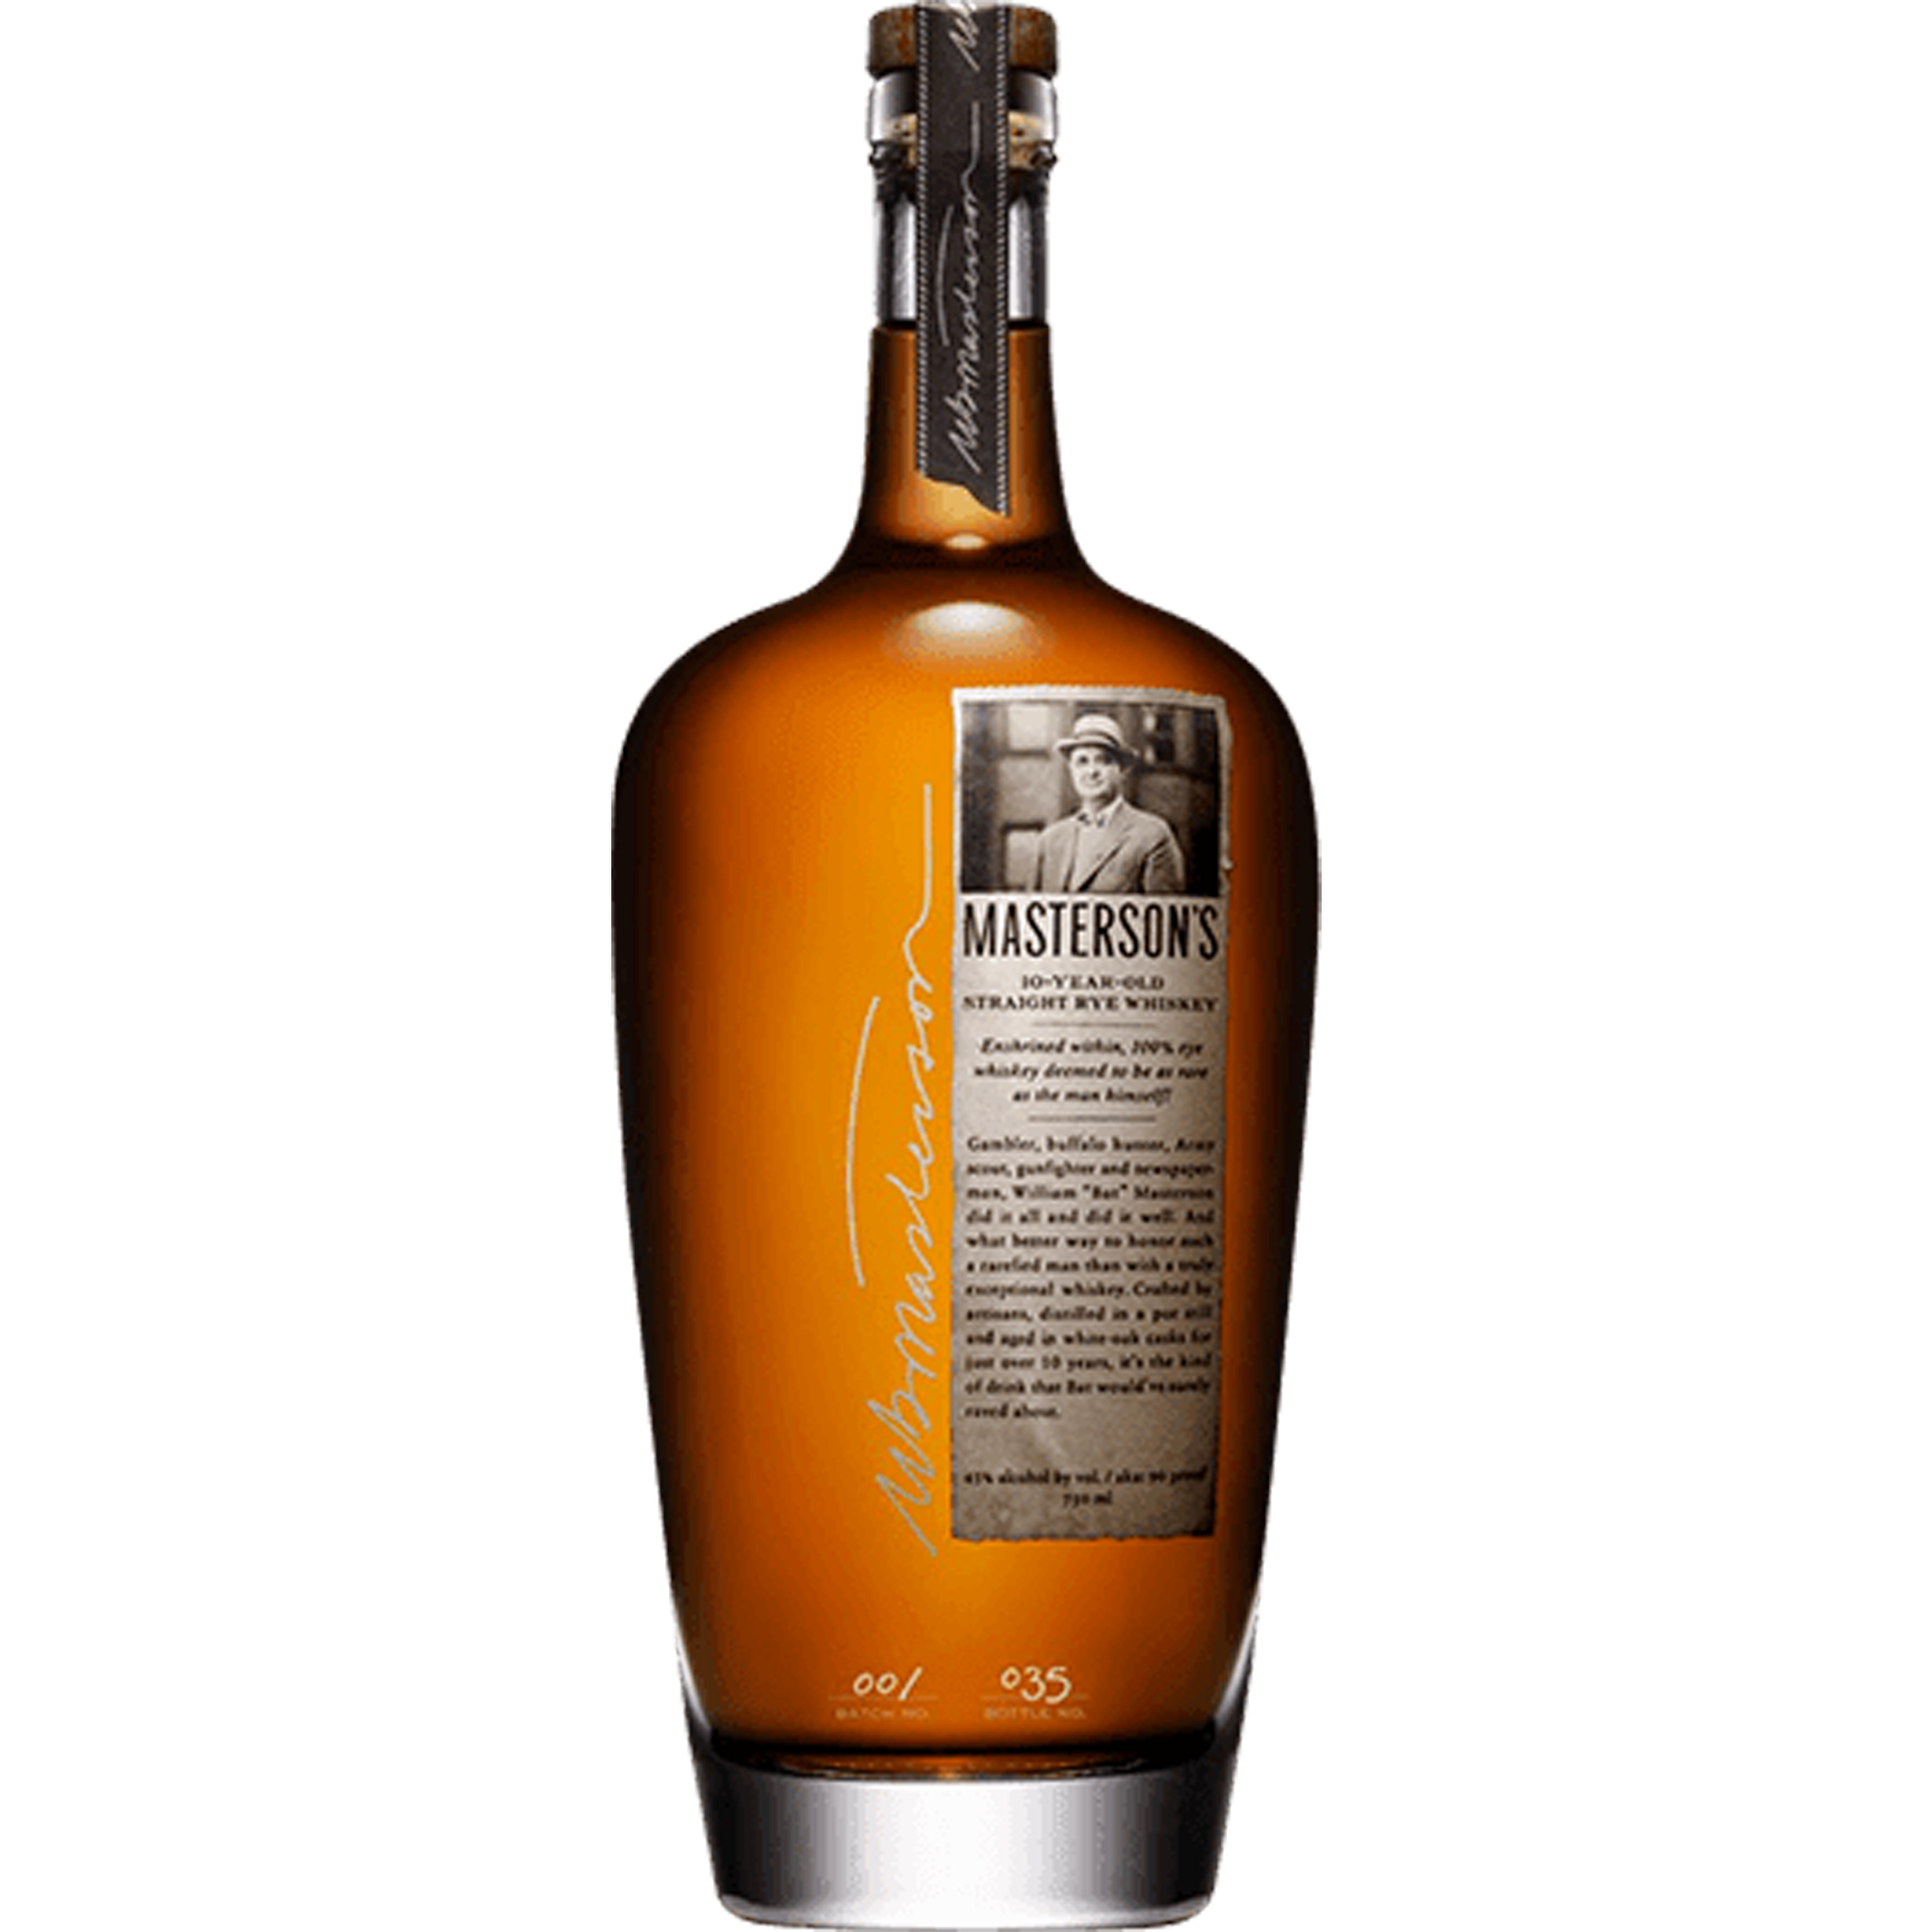 Mastersons 10 Year Old Straight Rye Whiskey Barrel Finished